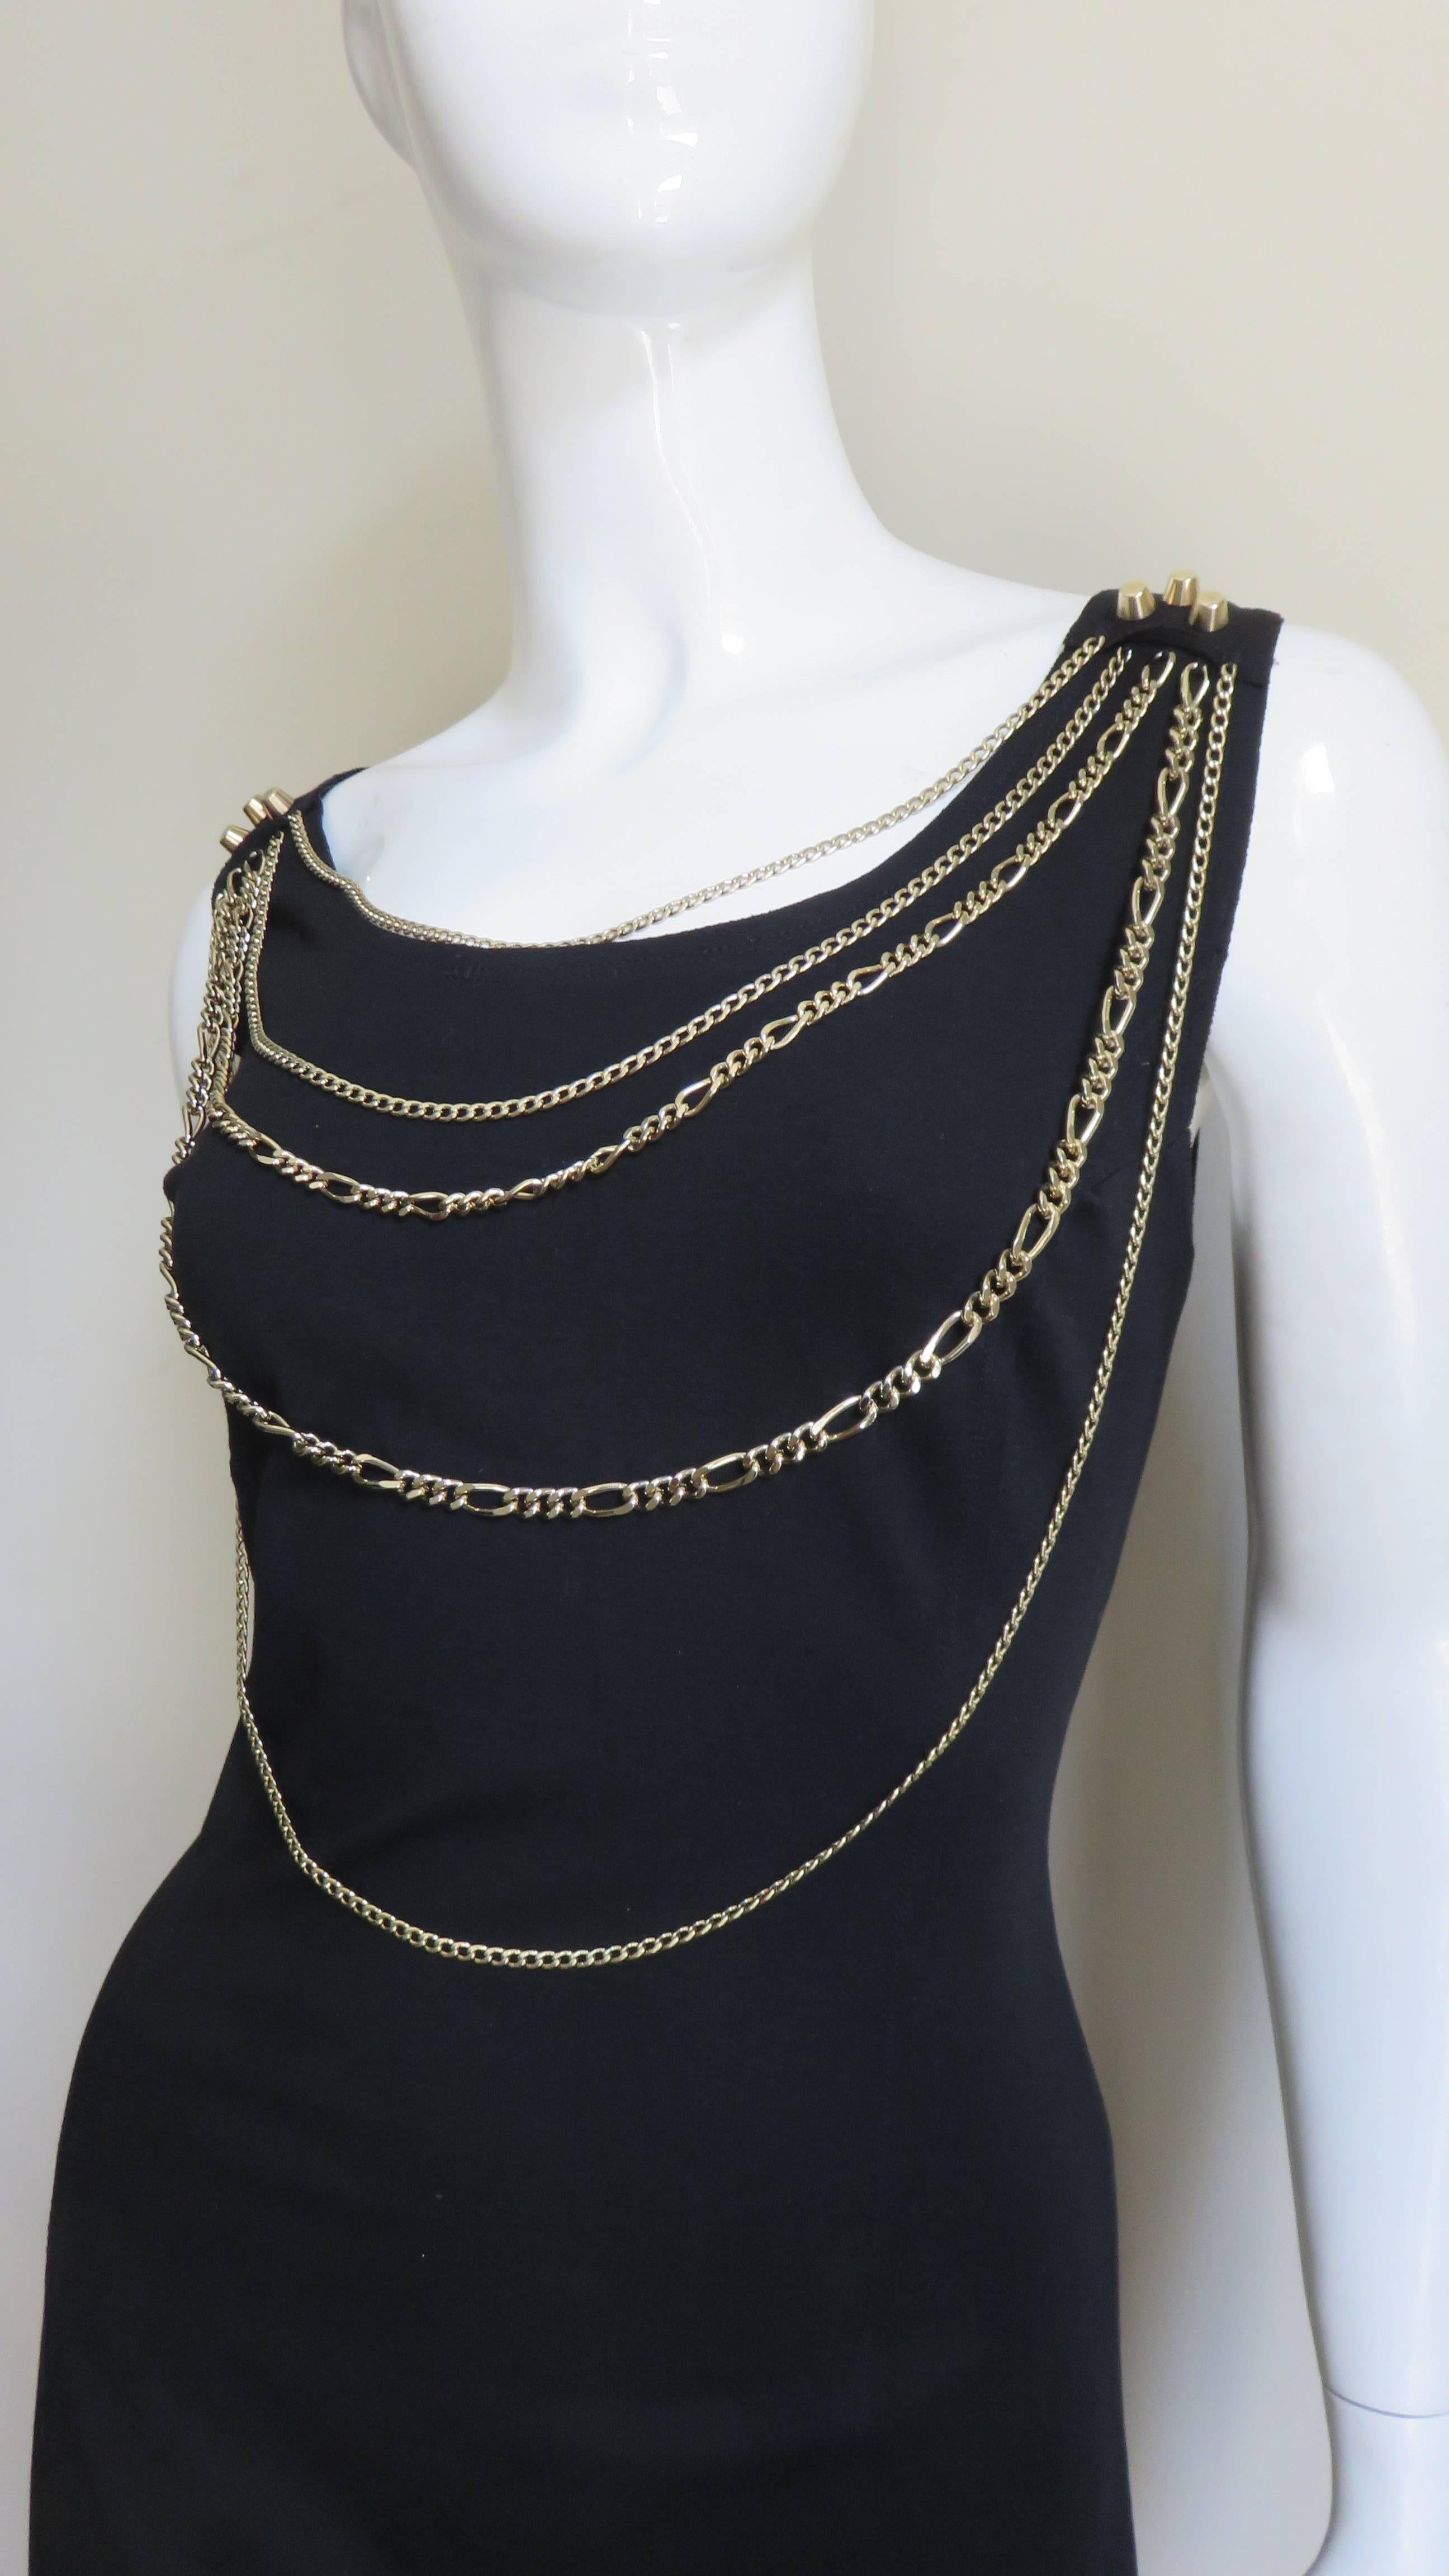 Pierre Balmain Dress with Chains  In Excellent Condition For Sale In Water Mill, NY